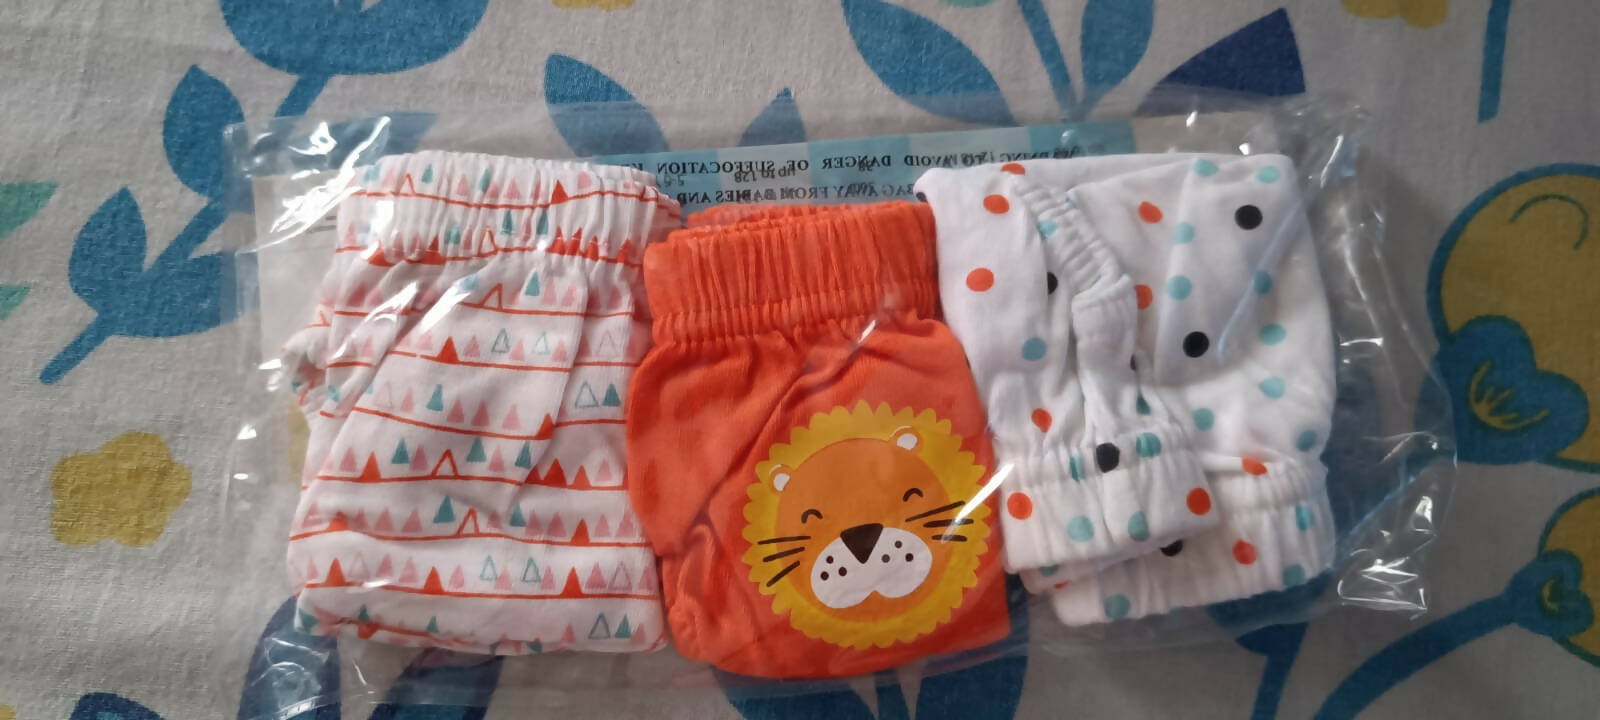 Babyhug 100% Cotton Padded Underwear Diapers Pack of 3 Size 3 Transport  Print - Multicolour Online in India, Buy at Best Price from